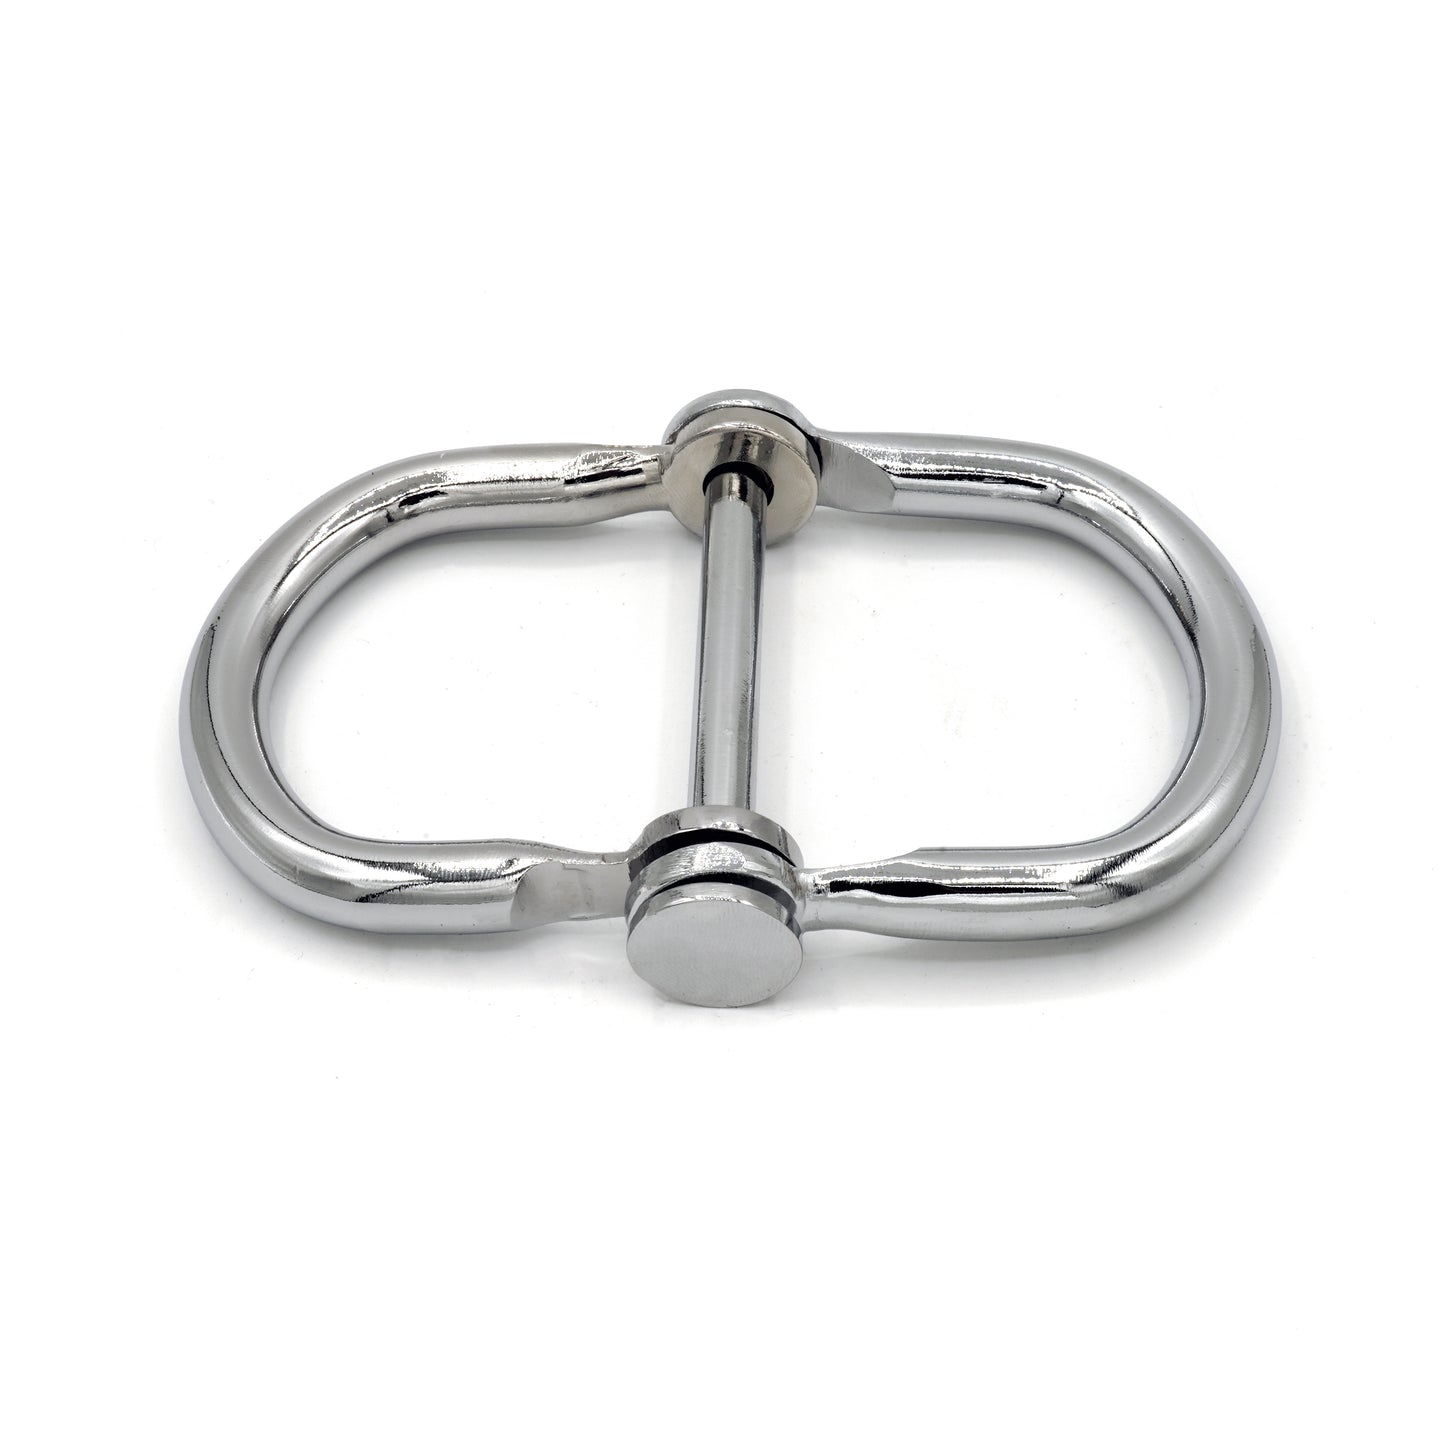 Tight foldable BDSM handcuffs with padlock